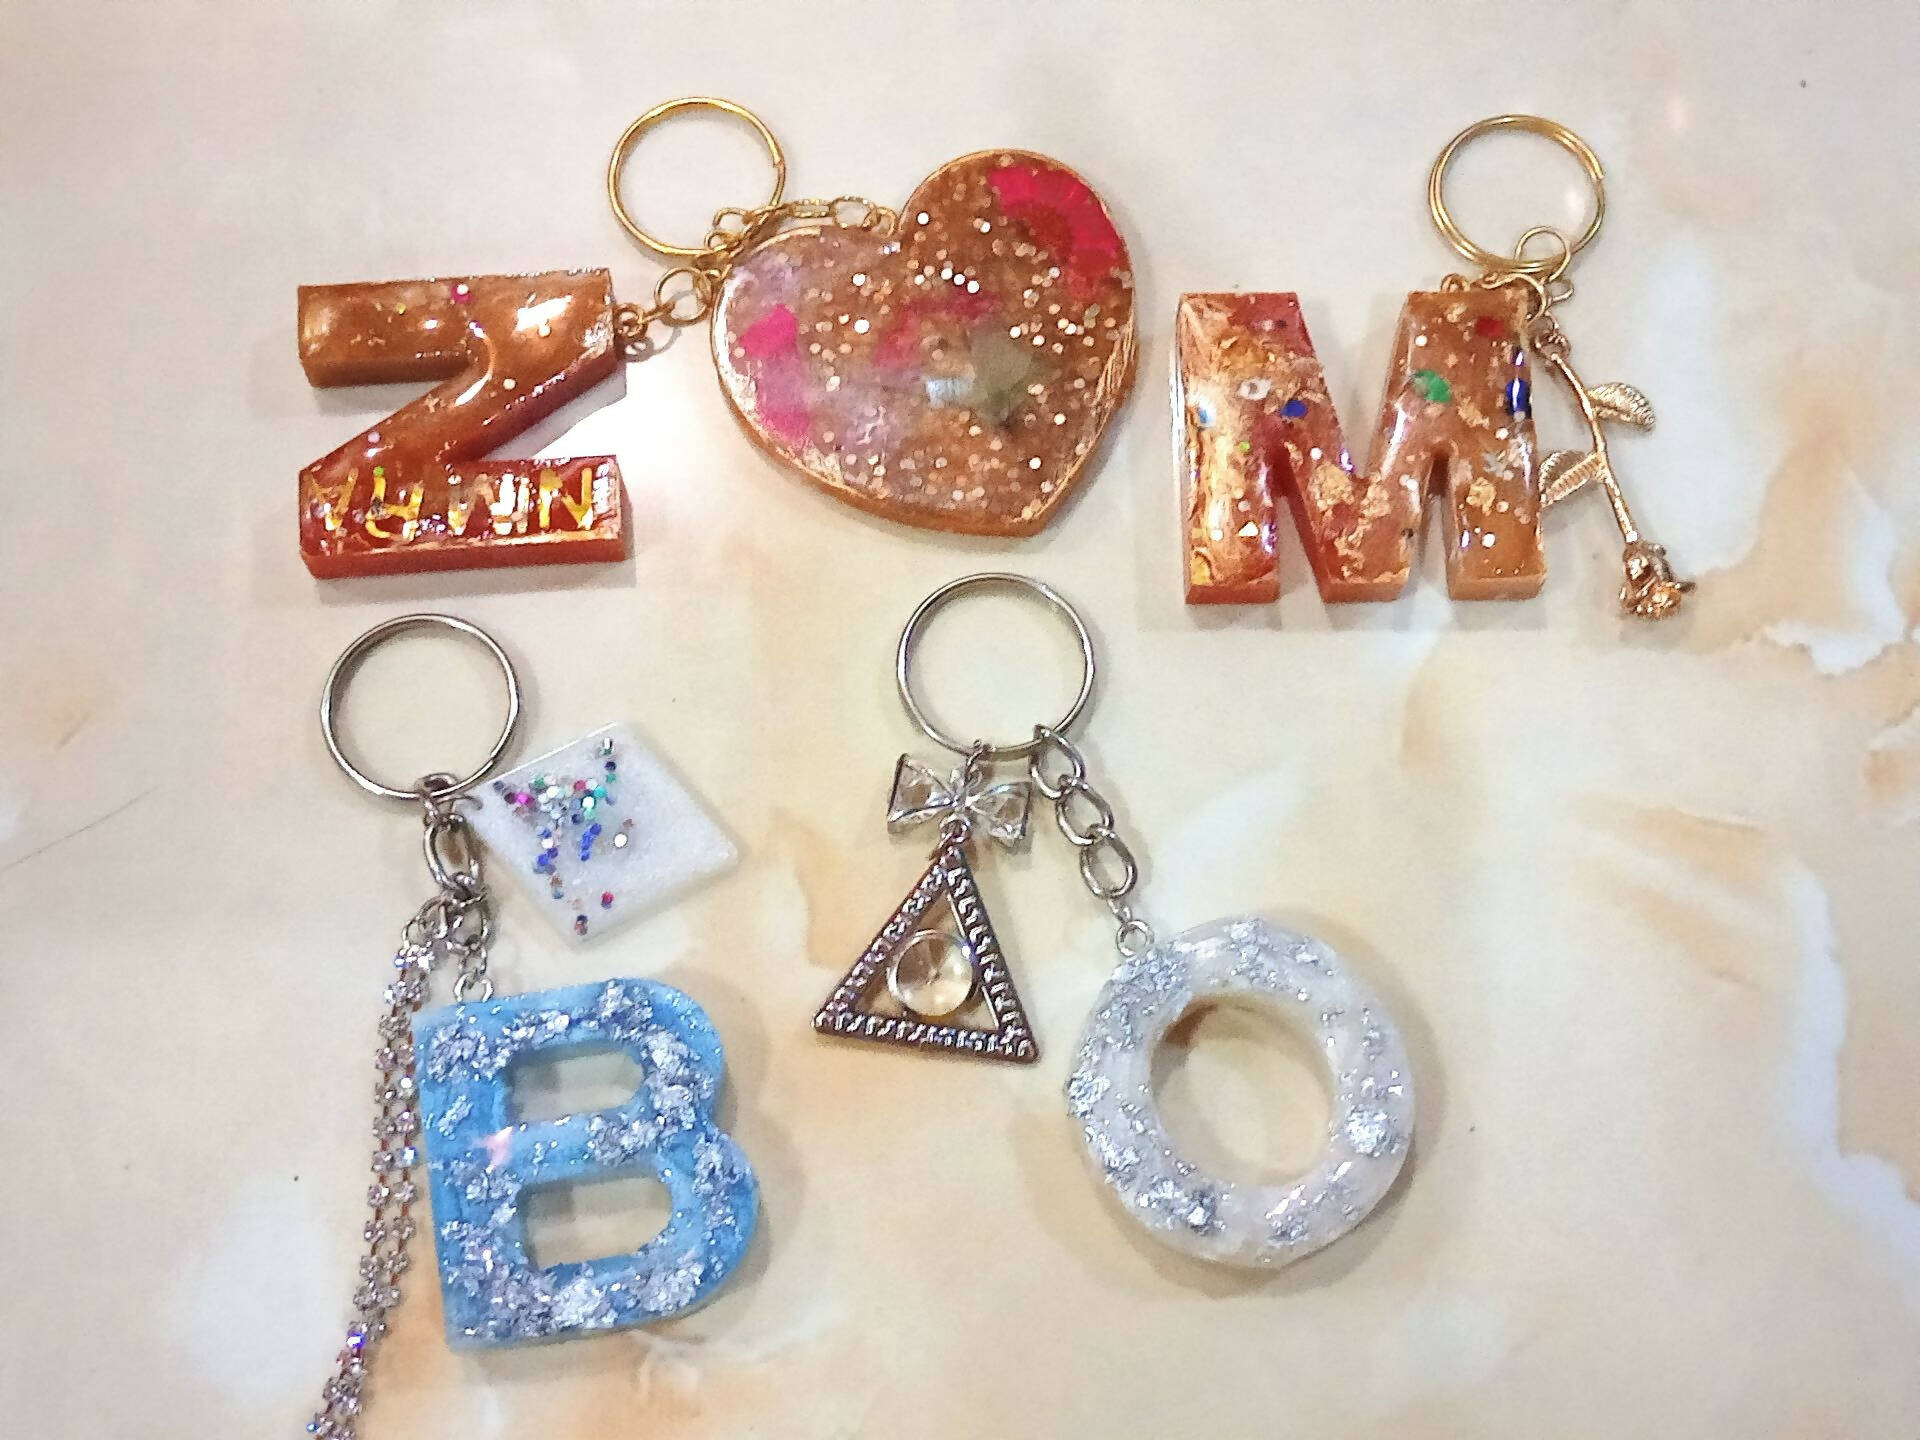 Glittery Alphabets with Metal or Big Charms Made with High Quality Resin